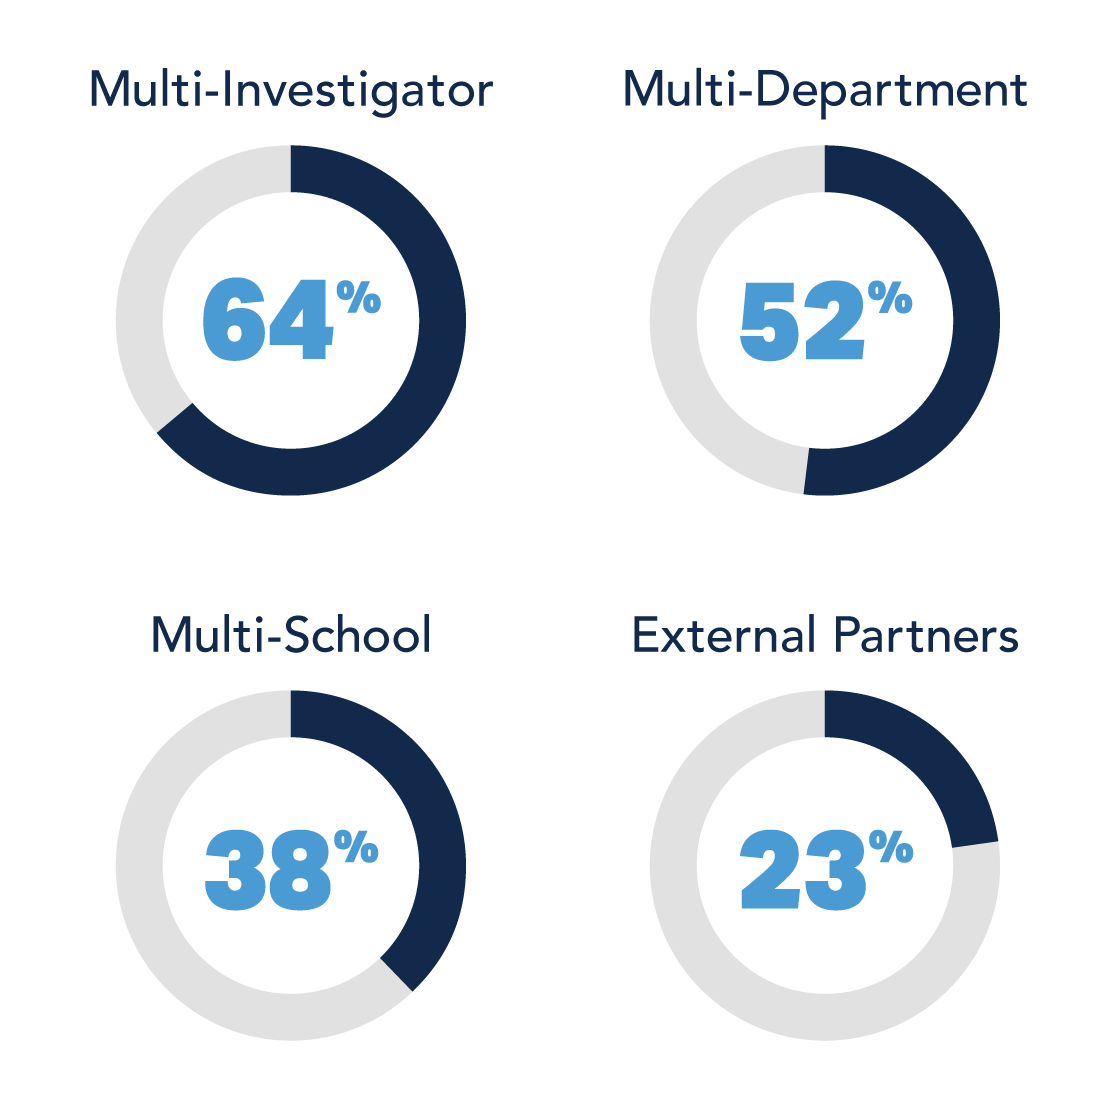 Four pie charts showing that Multi-Investigator research was 64%, multi-department was 52%, multi-school was 38%, and external partners were 23% in 2022.